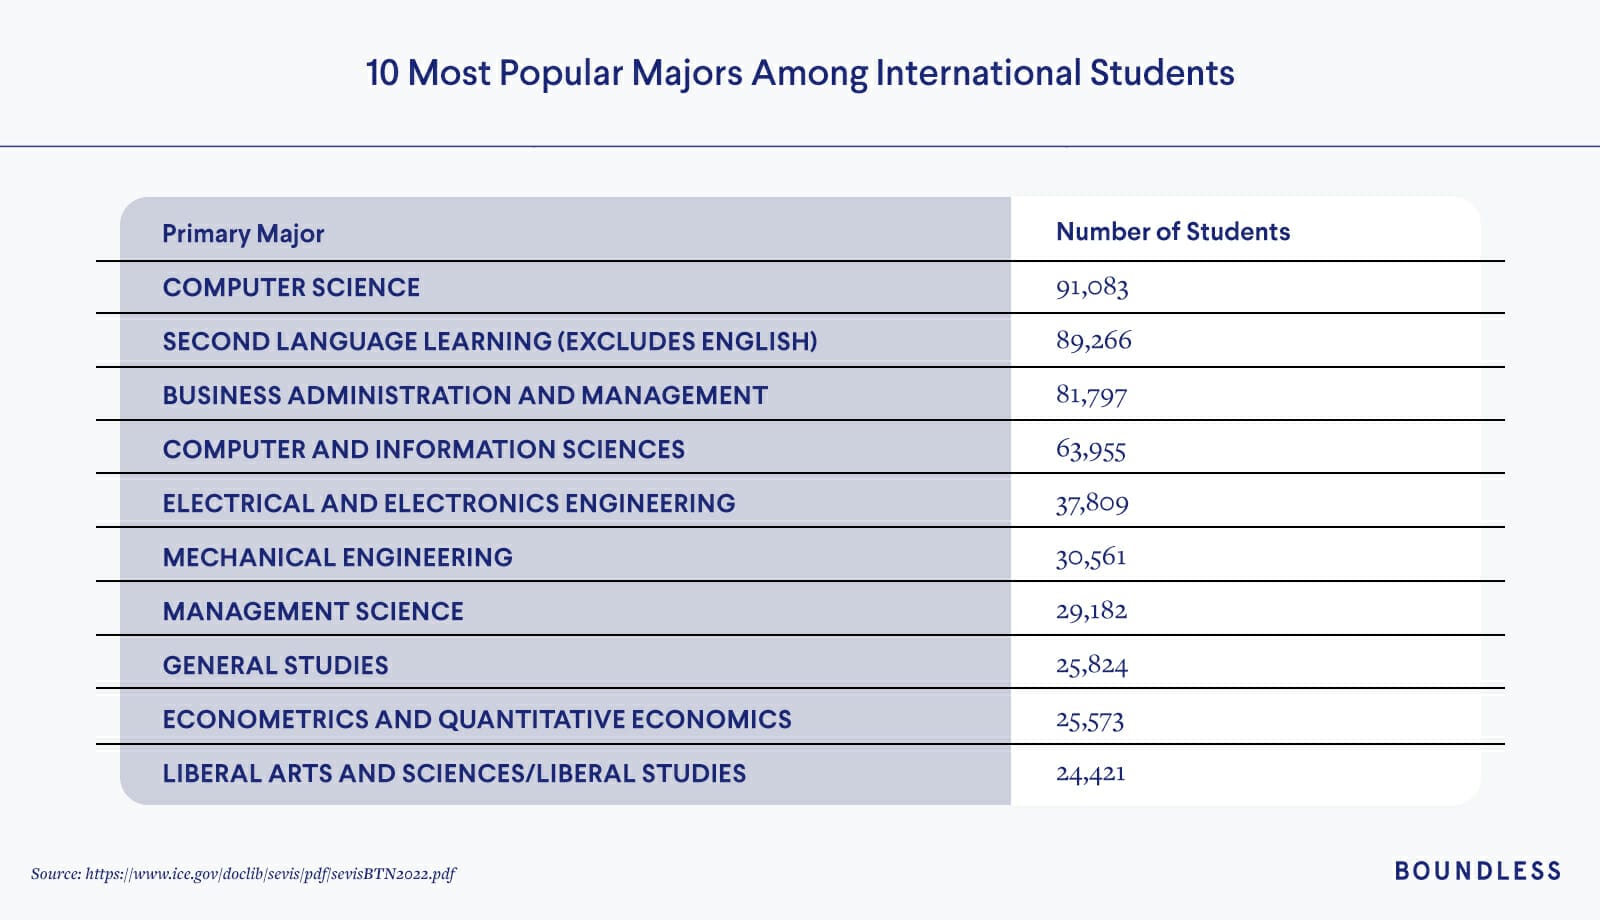 Top areas of study for international students